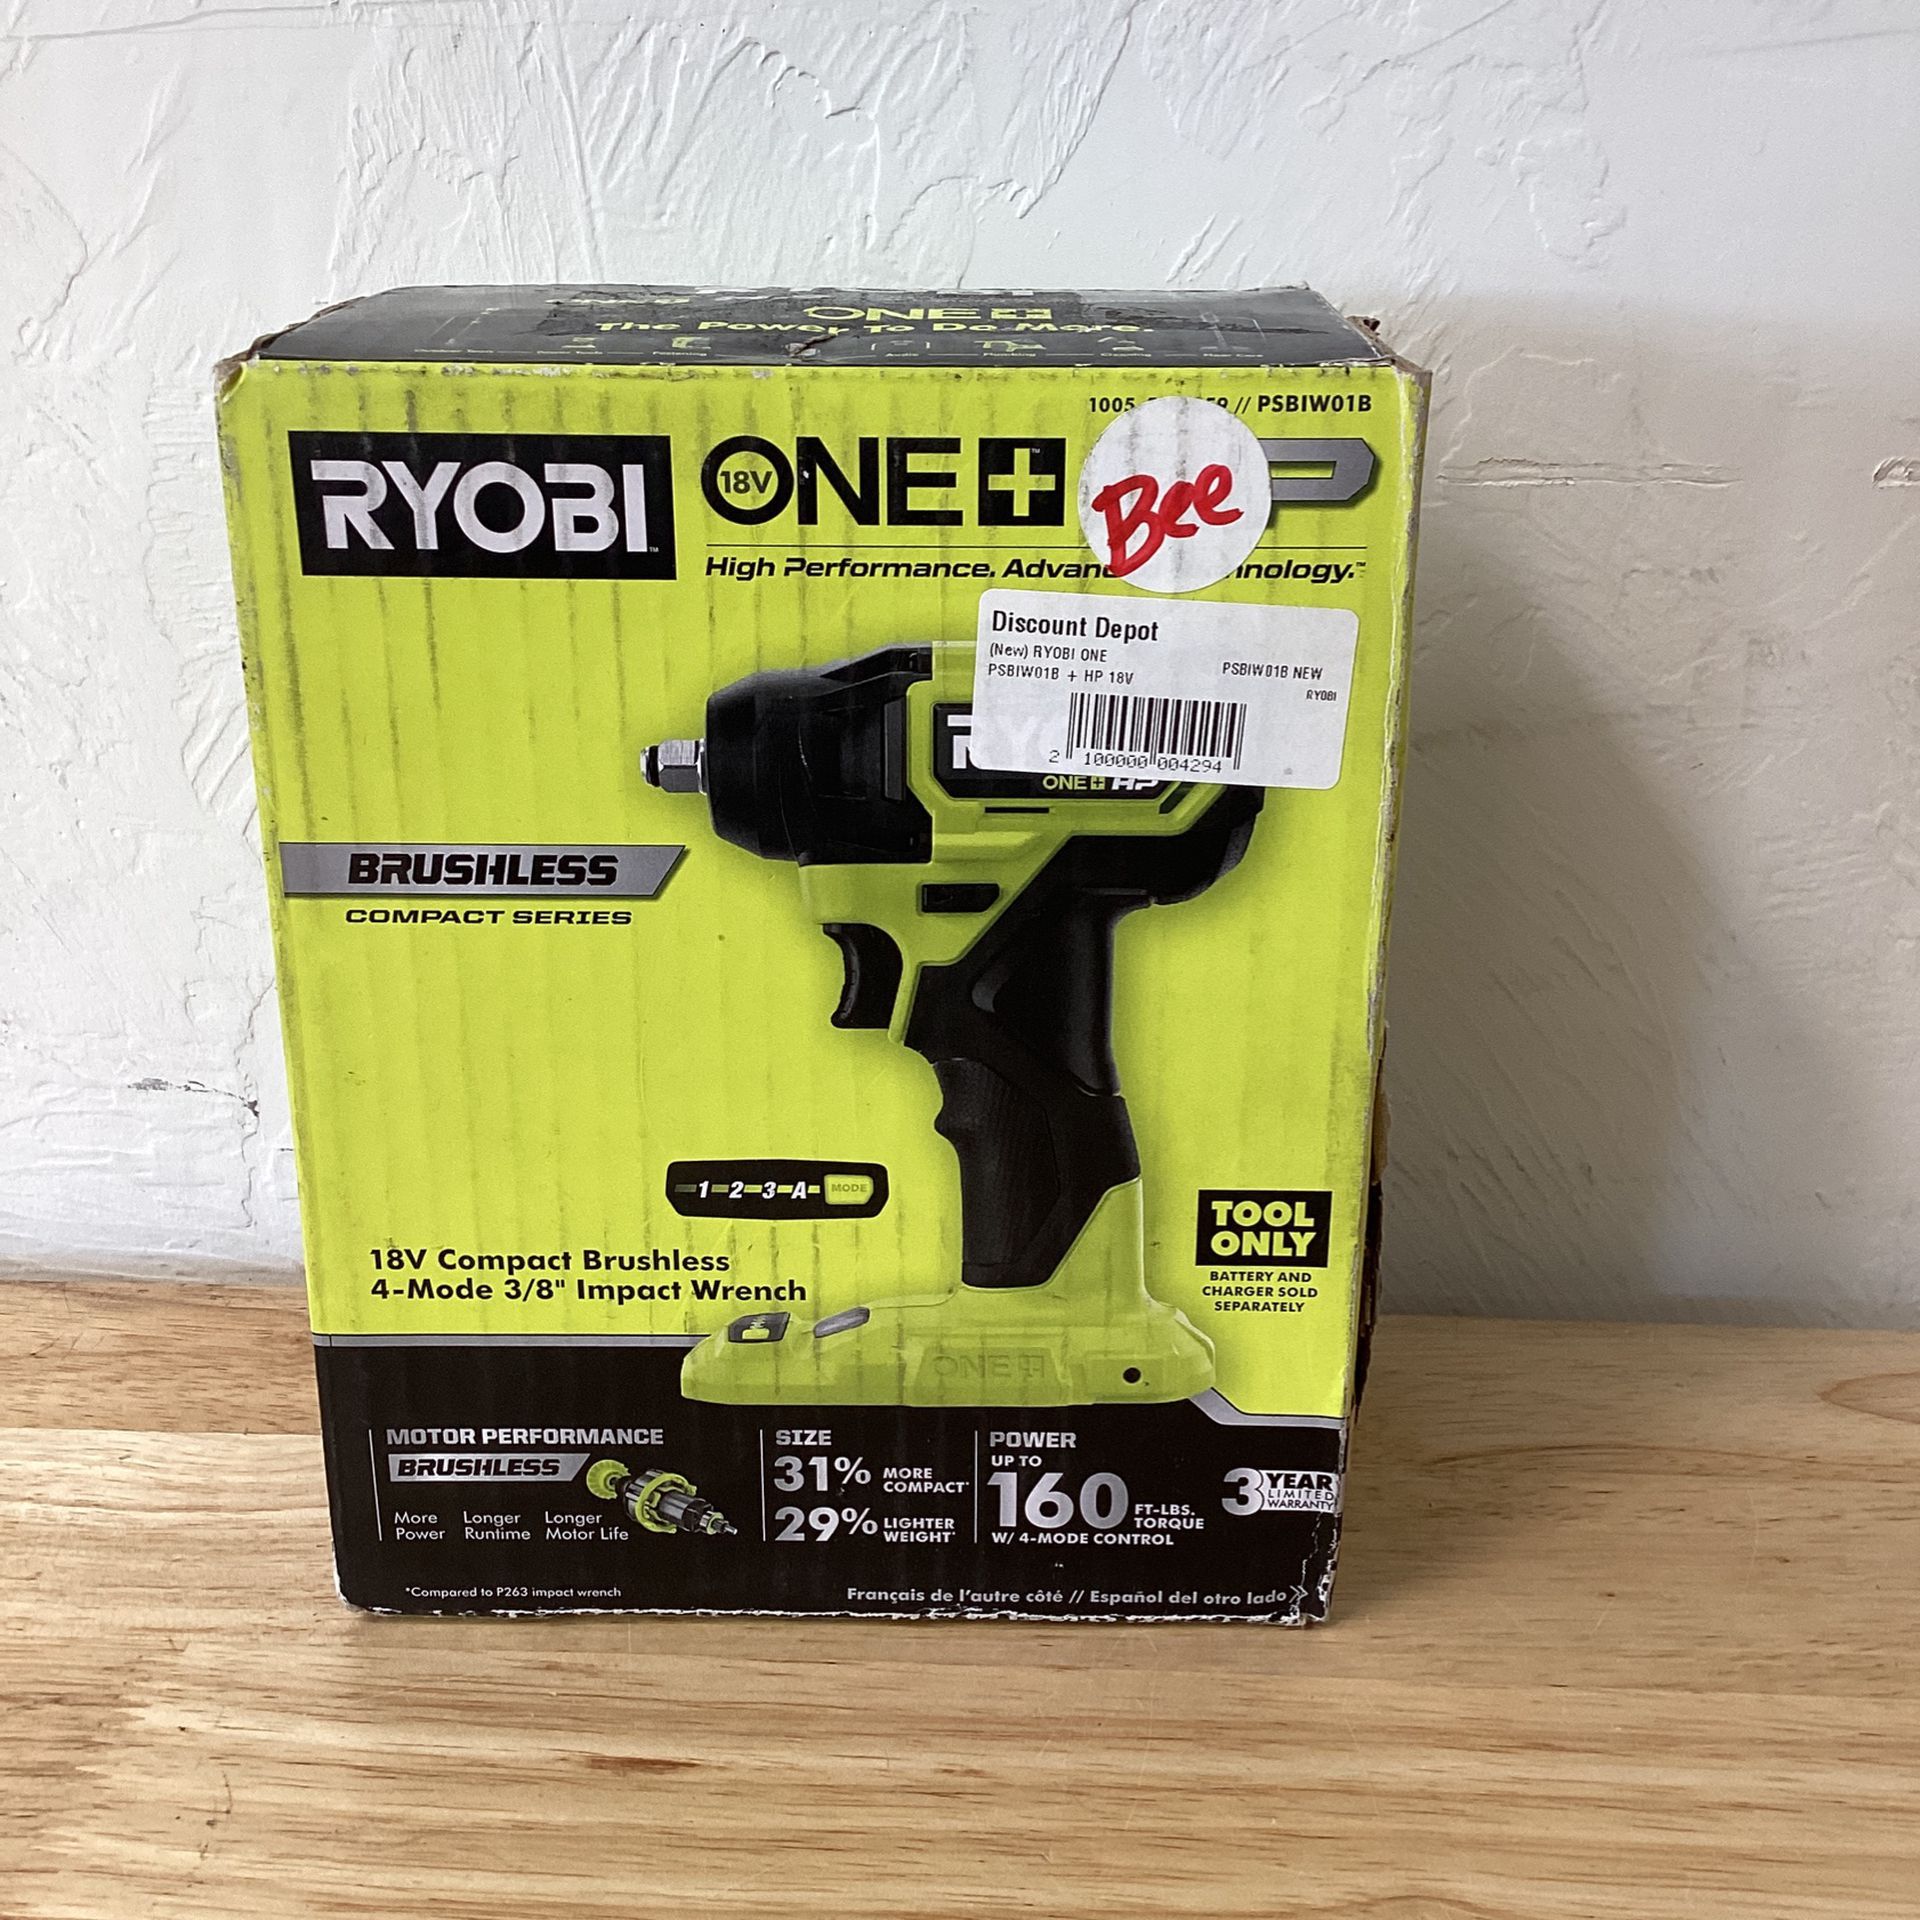 (New) RYOBI ONE PSBIW01B + HP 18V Brushless Cordless Compact 3/8 in. Impact Wrench (Tool Only)